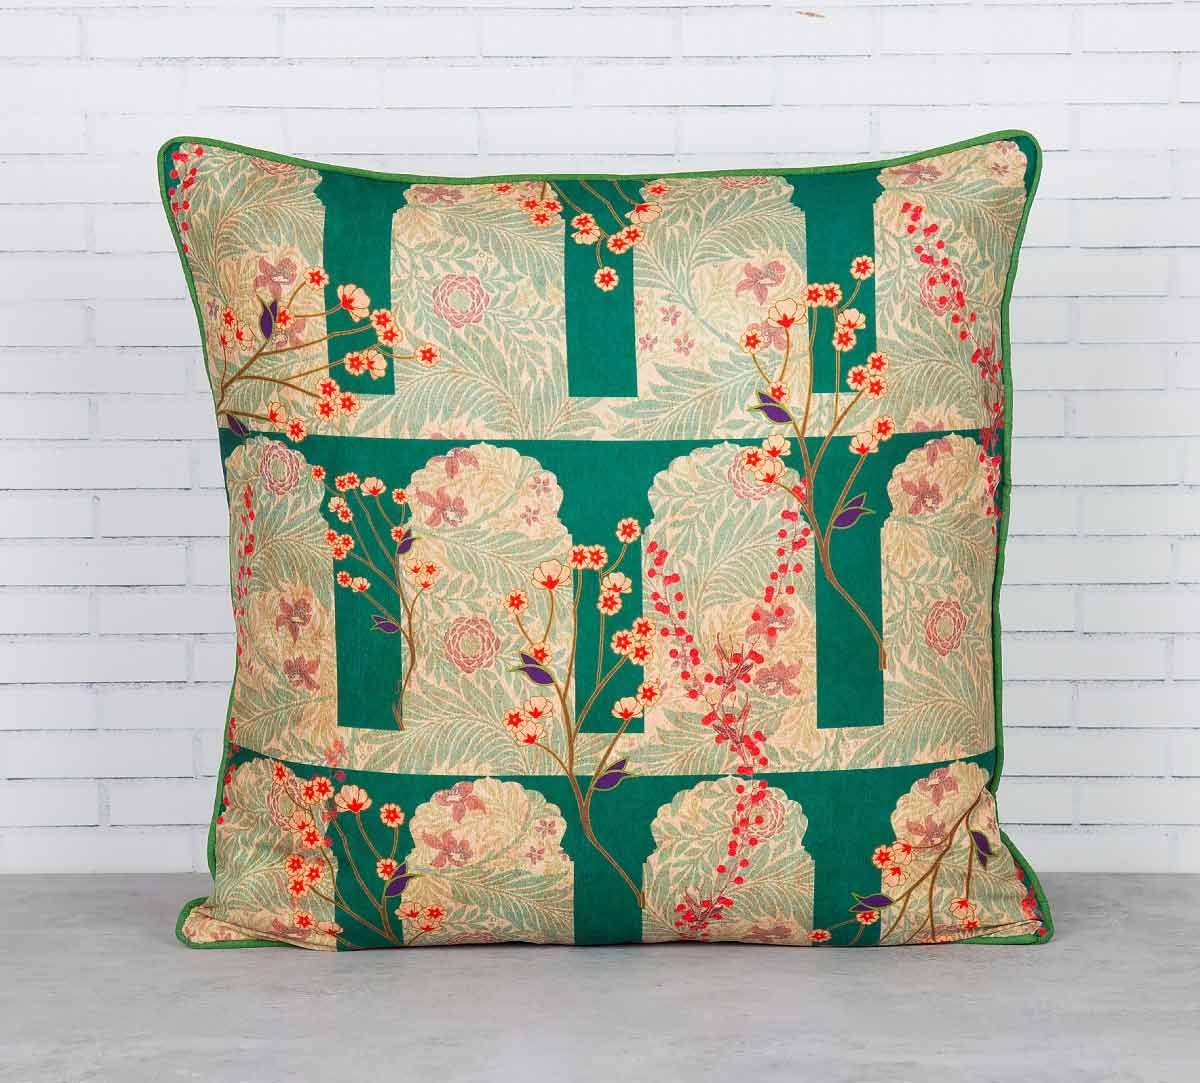 India Circus Cypress Vines Blended Taf Silk Cushion Cover